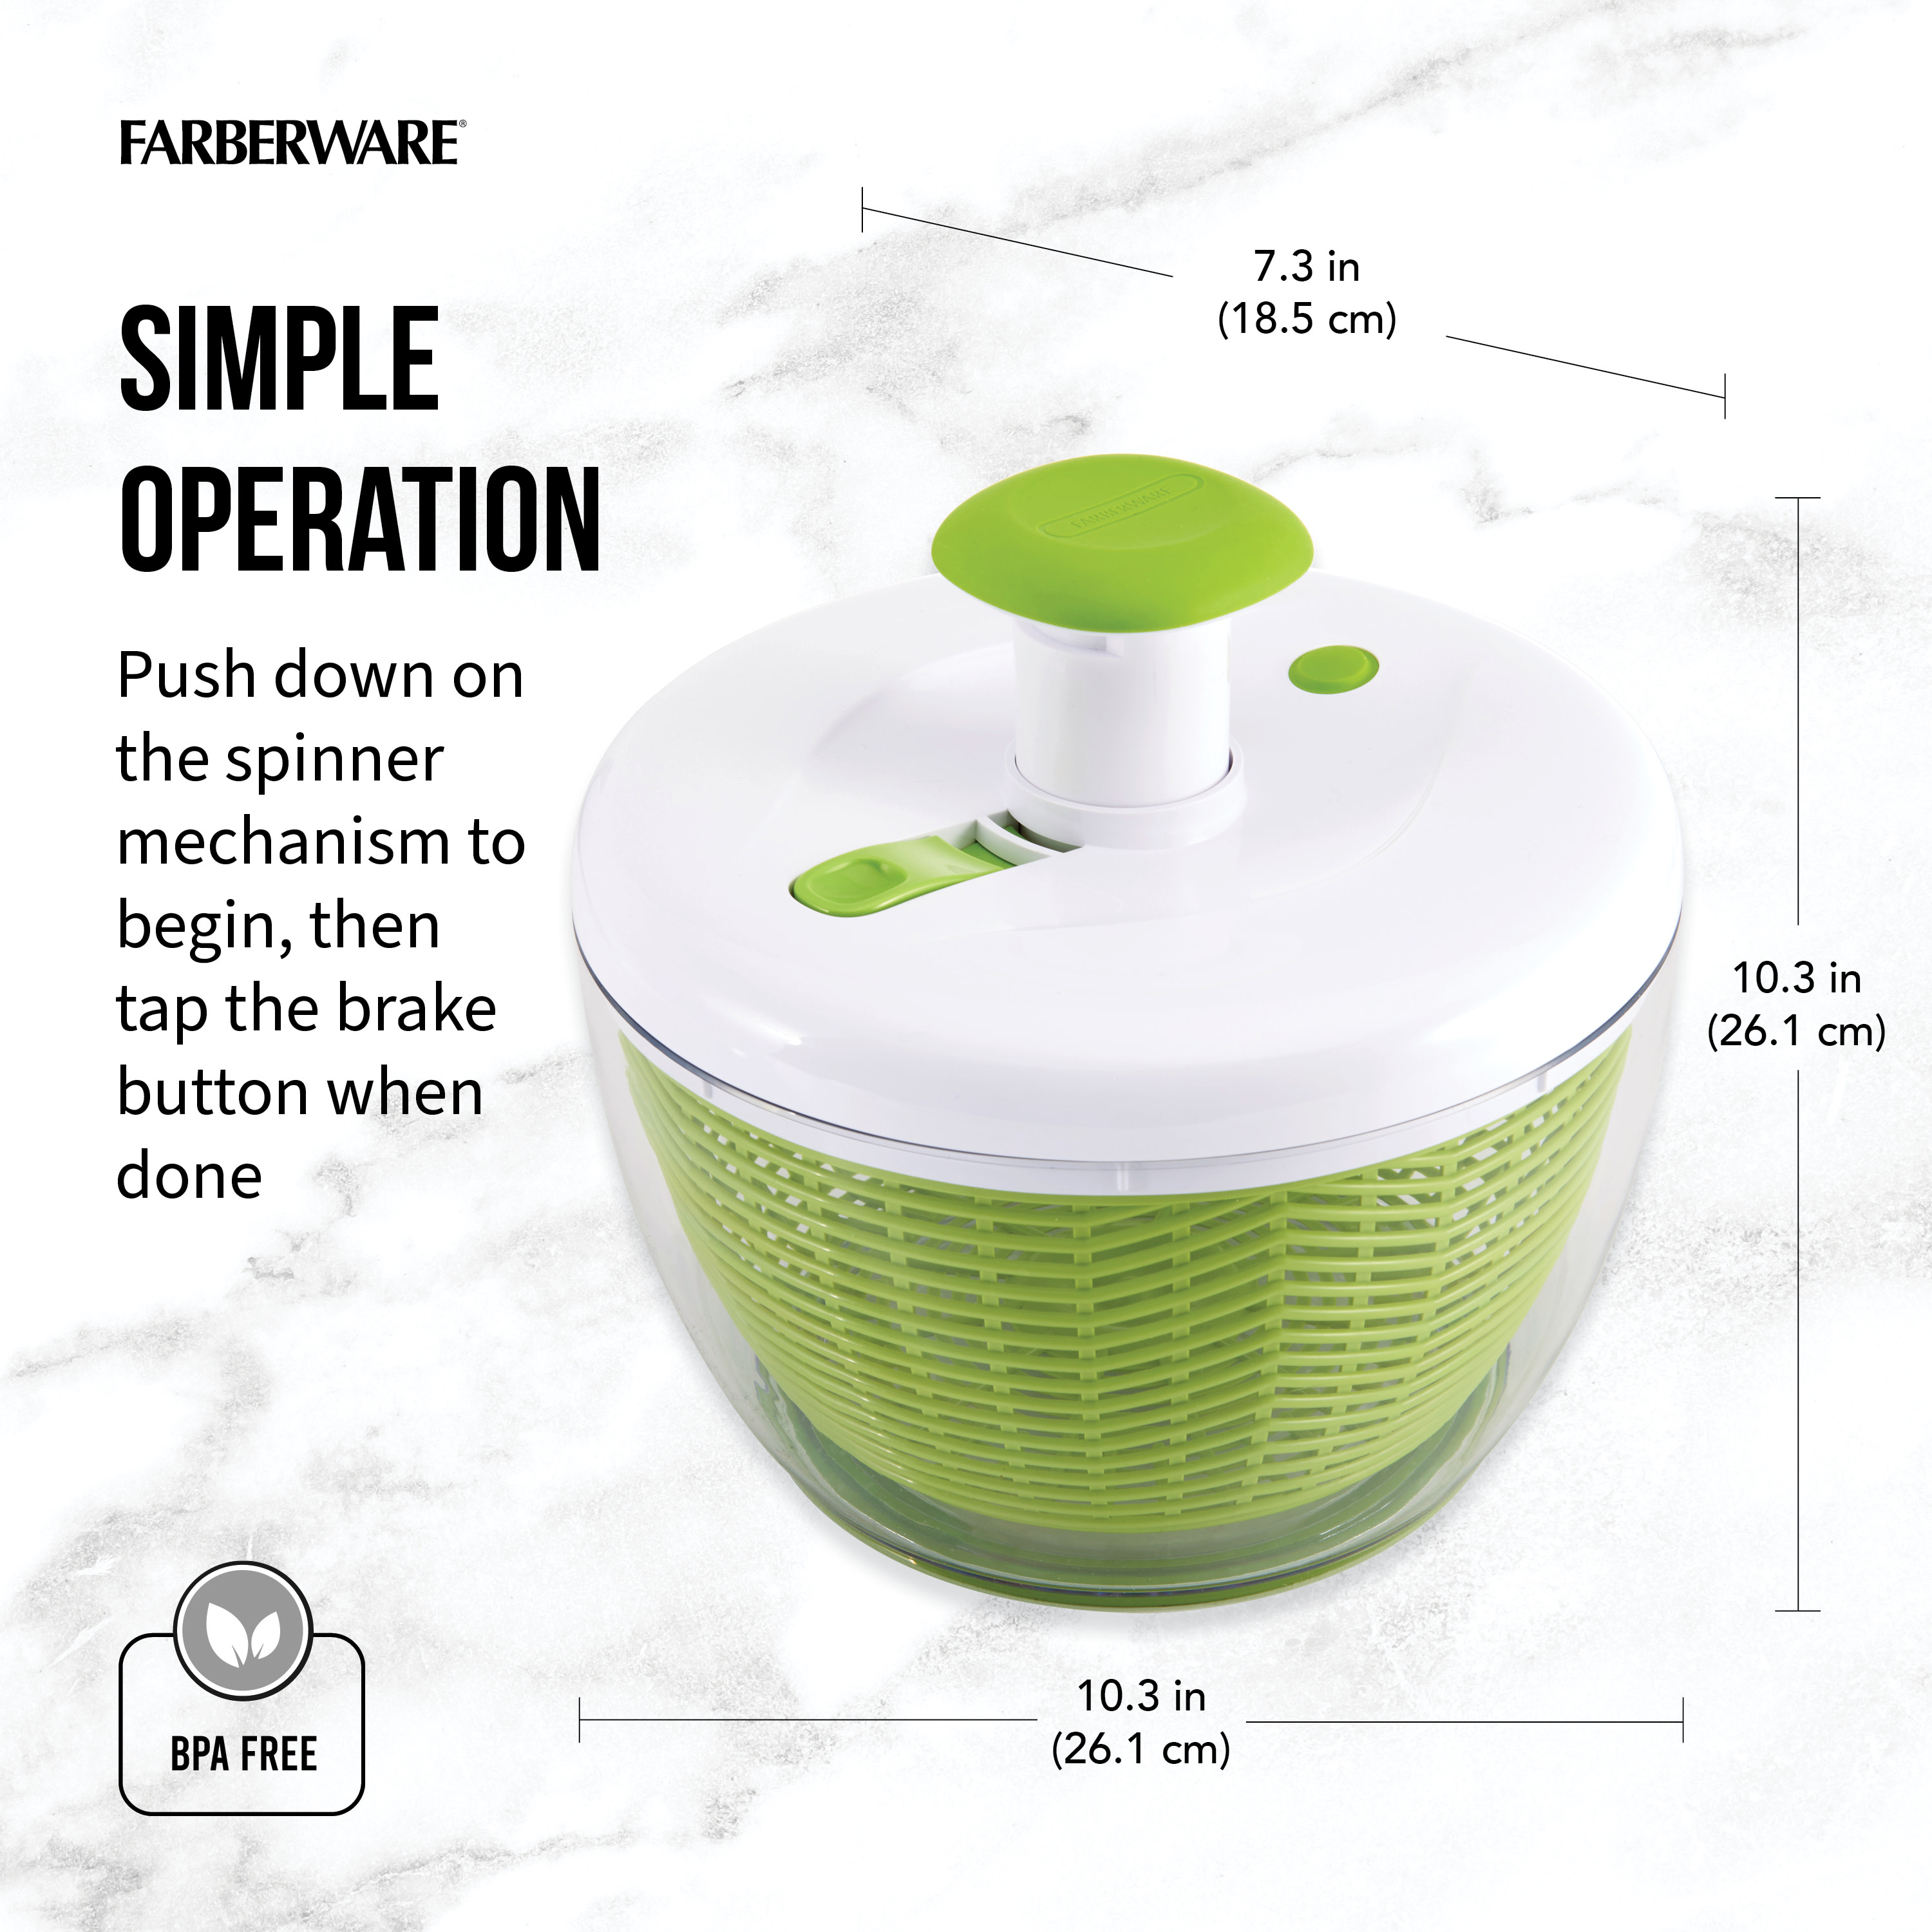 Farberware Professional Plastic 2.4 lb Salad Spinner Green with White Lid - image 4 of 26